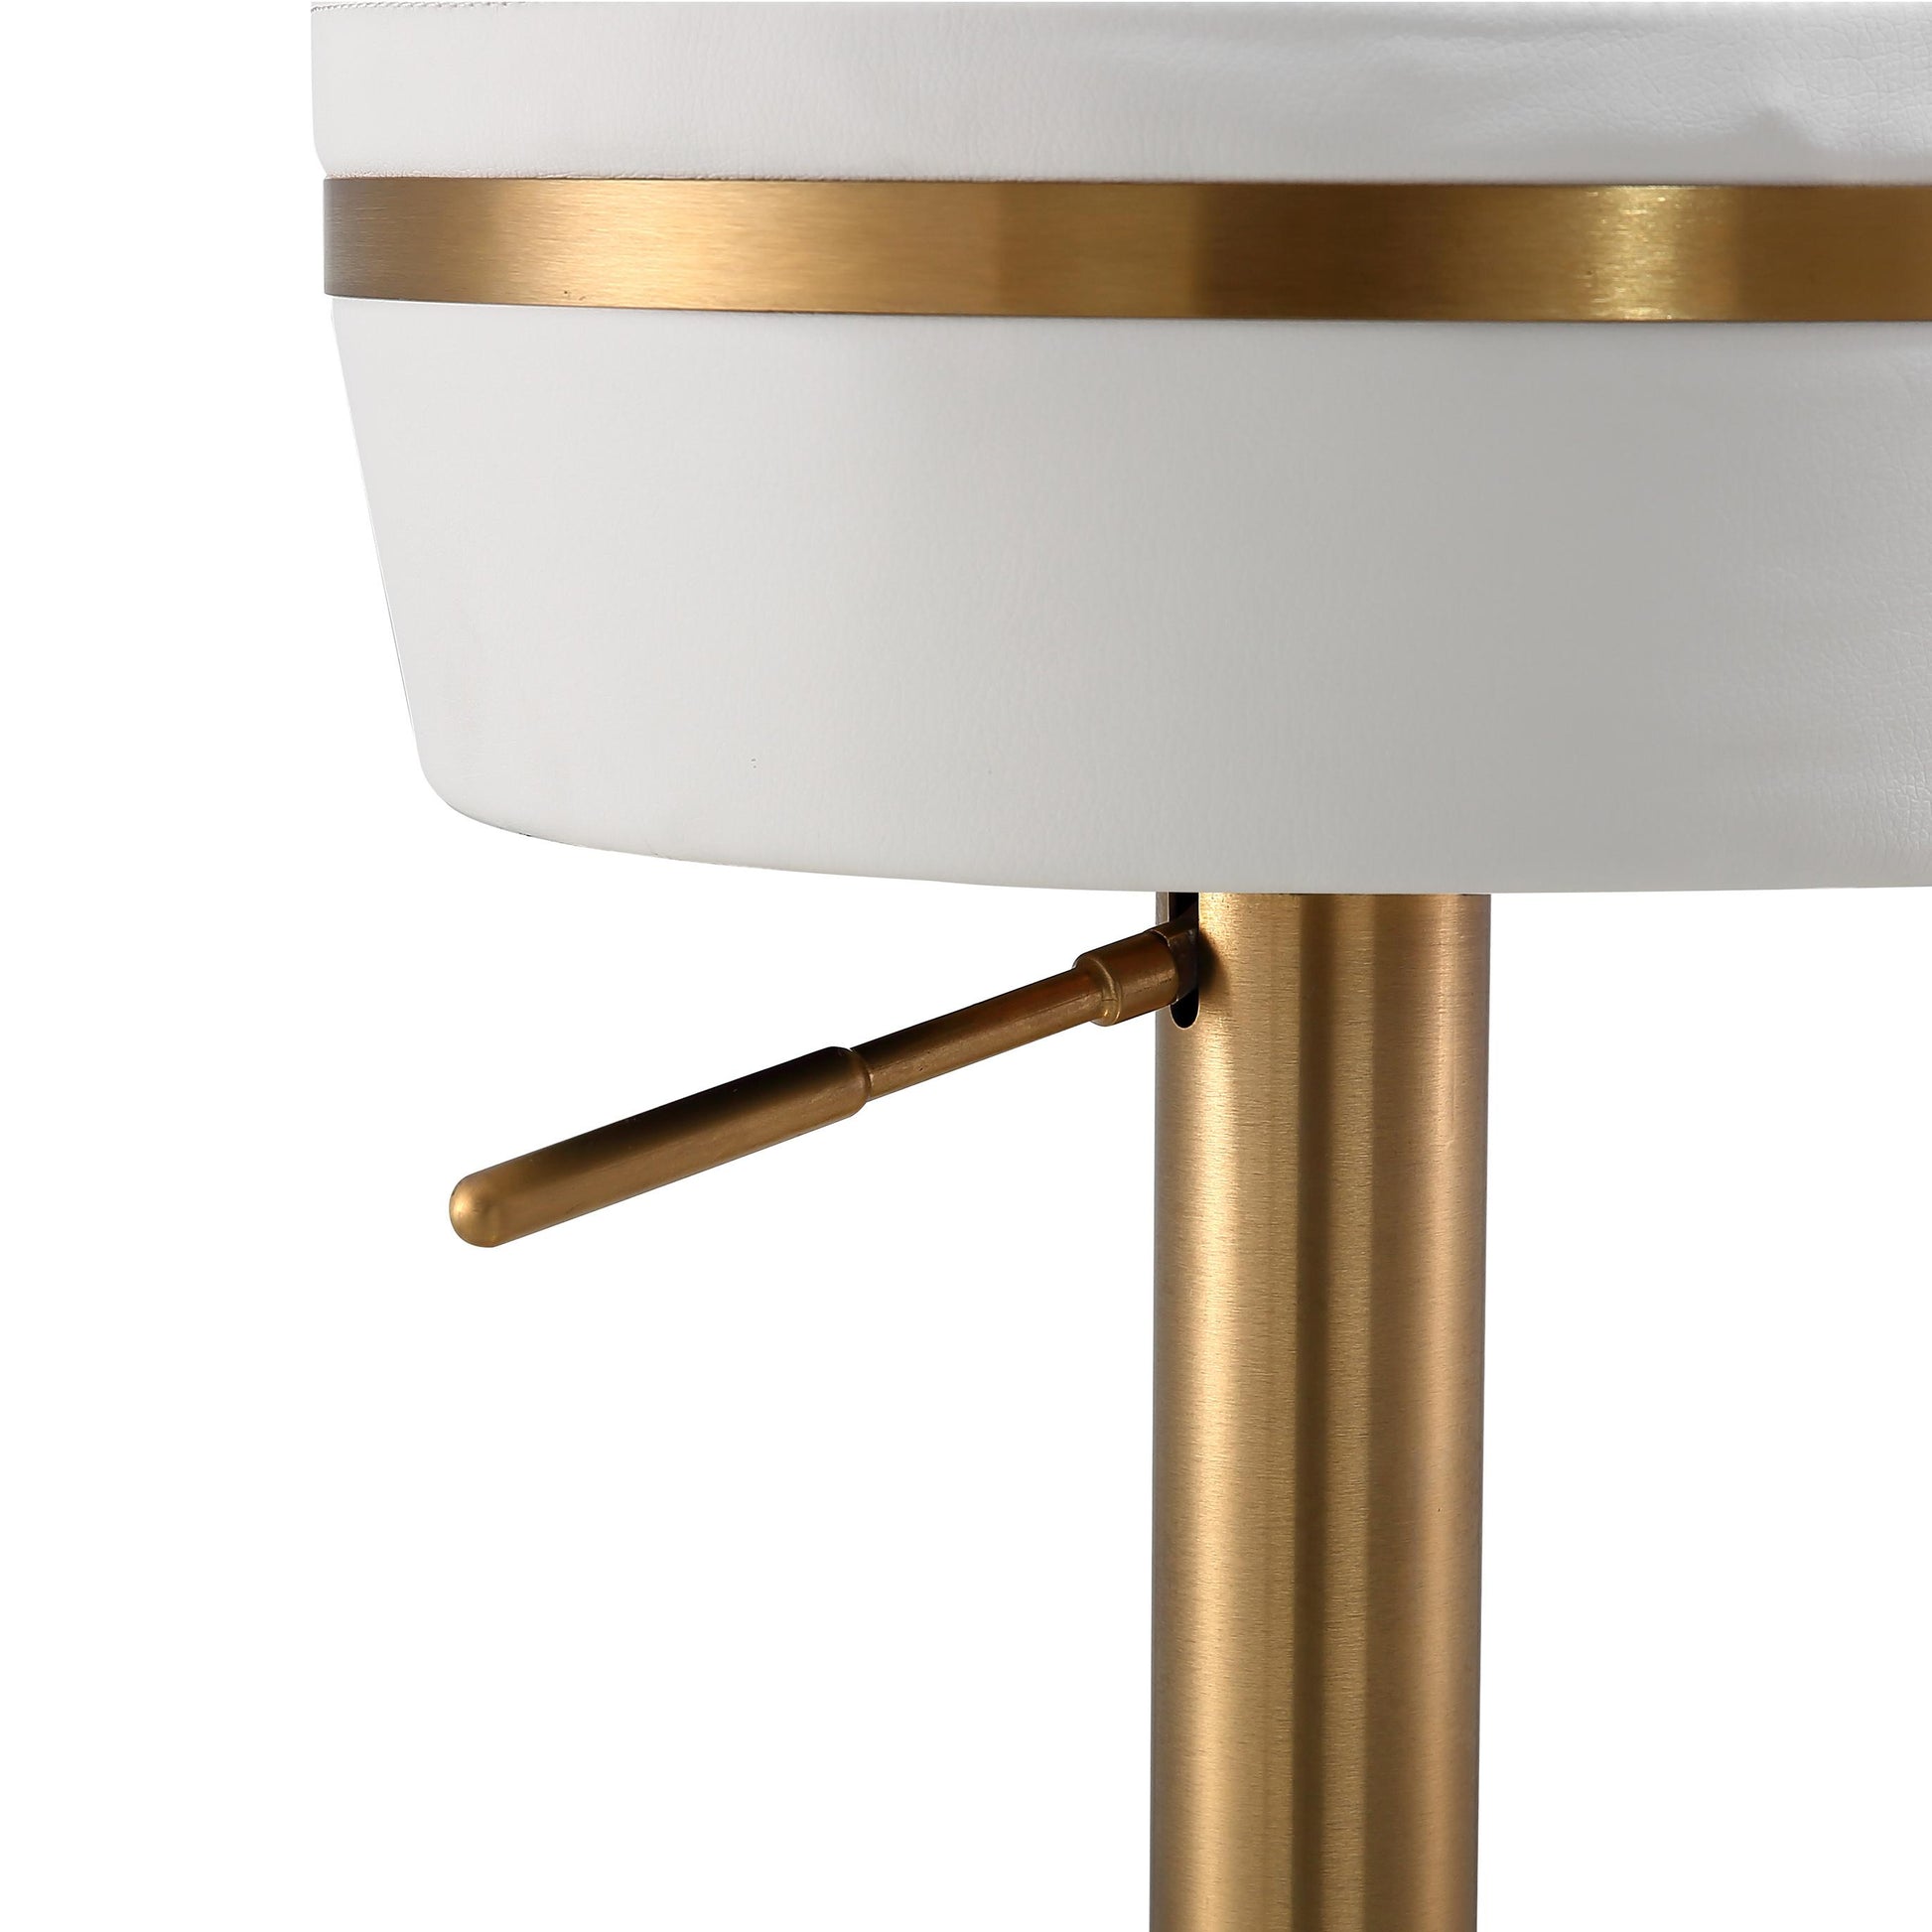 Astro White Gold Adjustable Stool by TOV